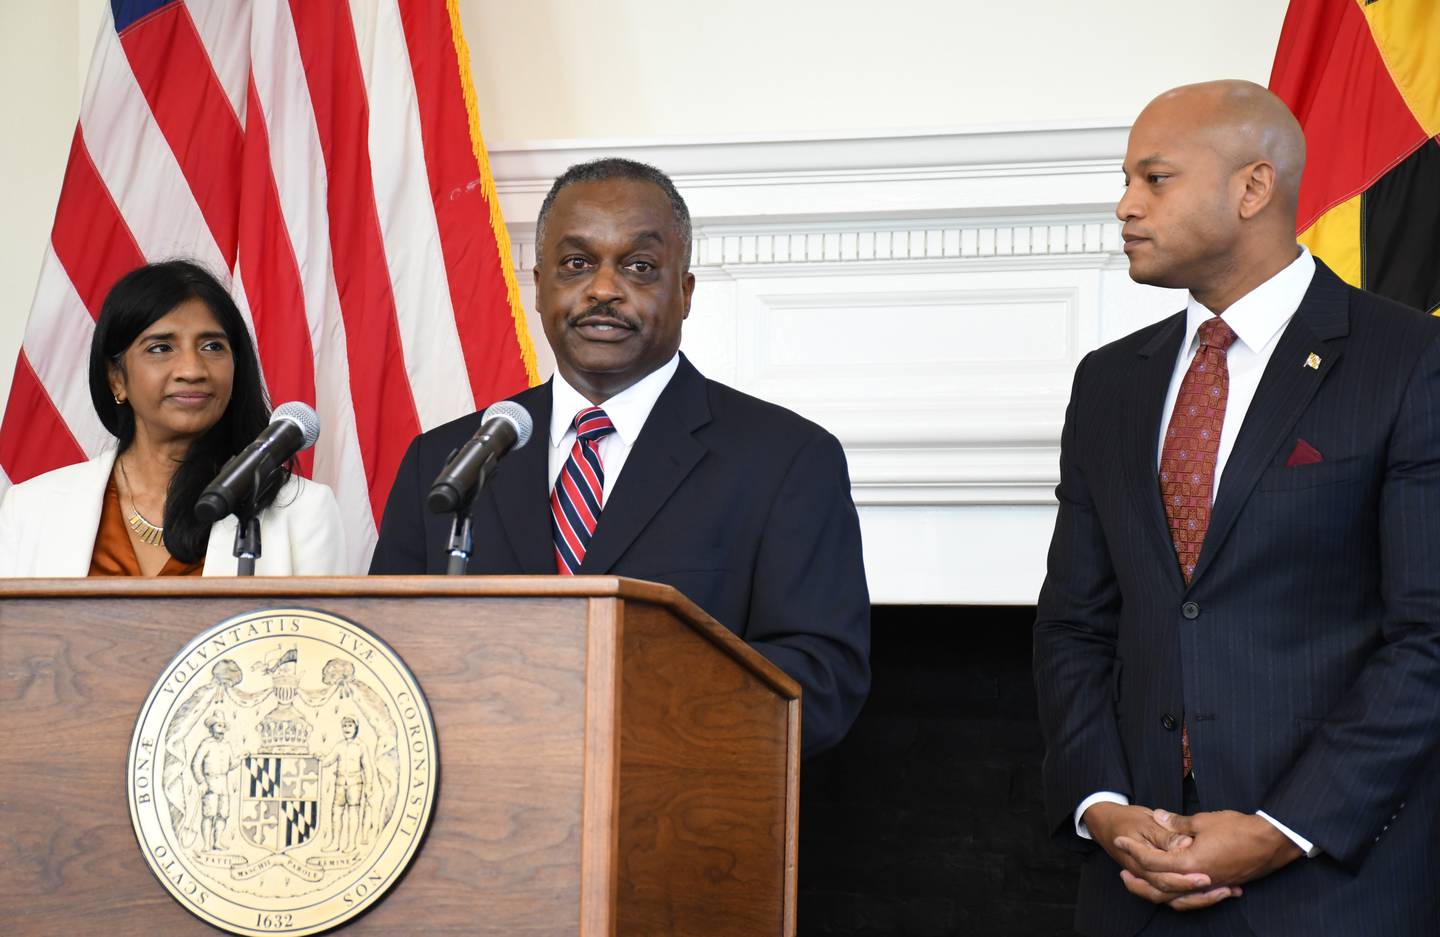 Roland Butler, who has been nominated to be superintendent of the Maryland State Police, speaks during a press conference at the State House in Annapolis on Thursday, Feb. 23, 2023. He's flanked by Lt. Gov. Aruna Miller, left, and Gov. Wes Moore, right.